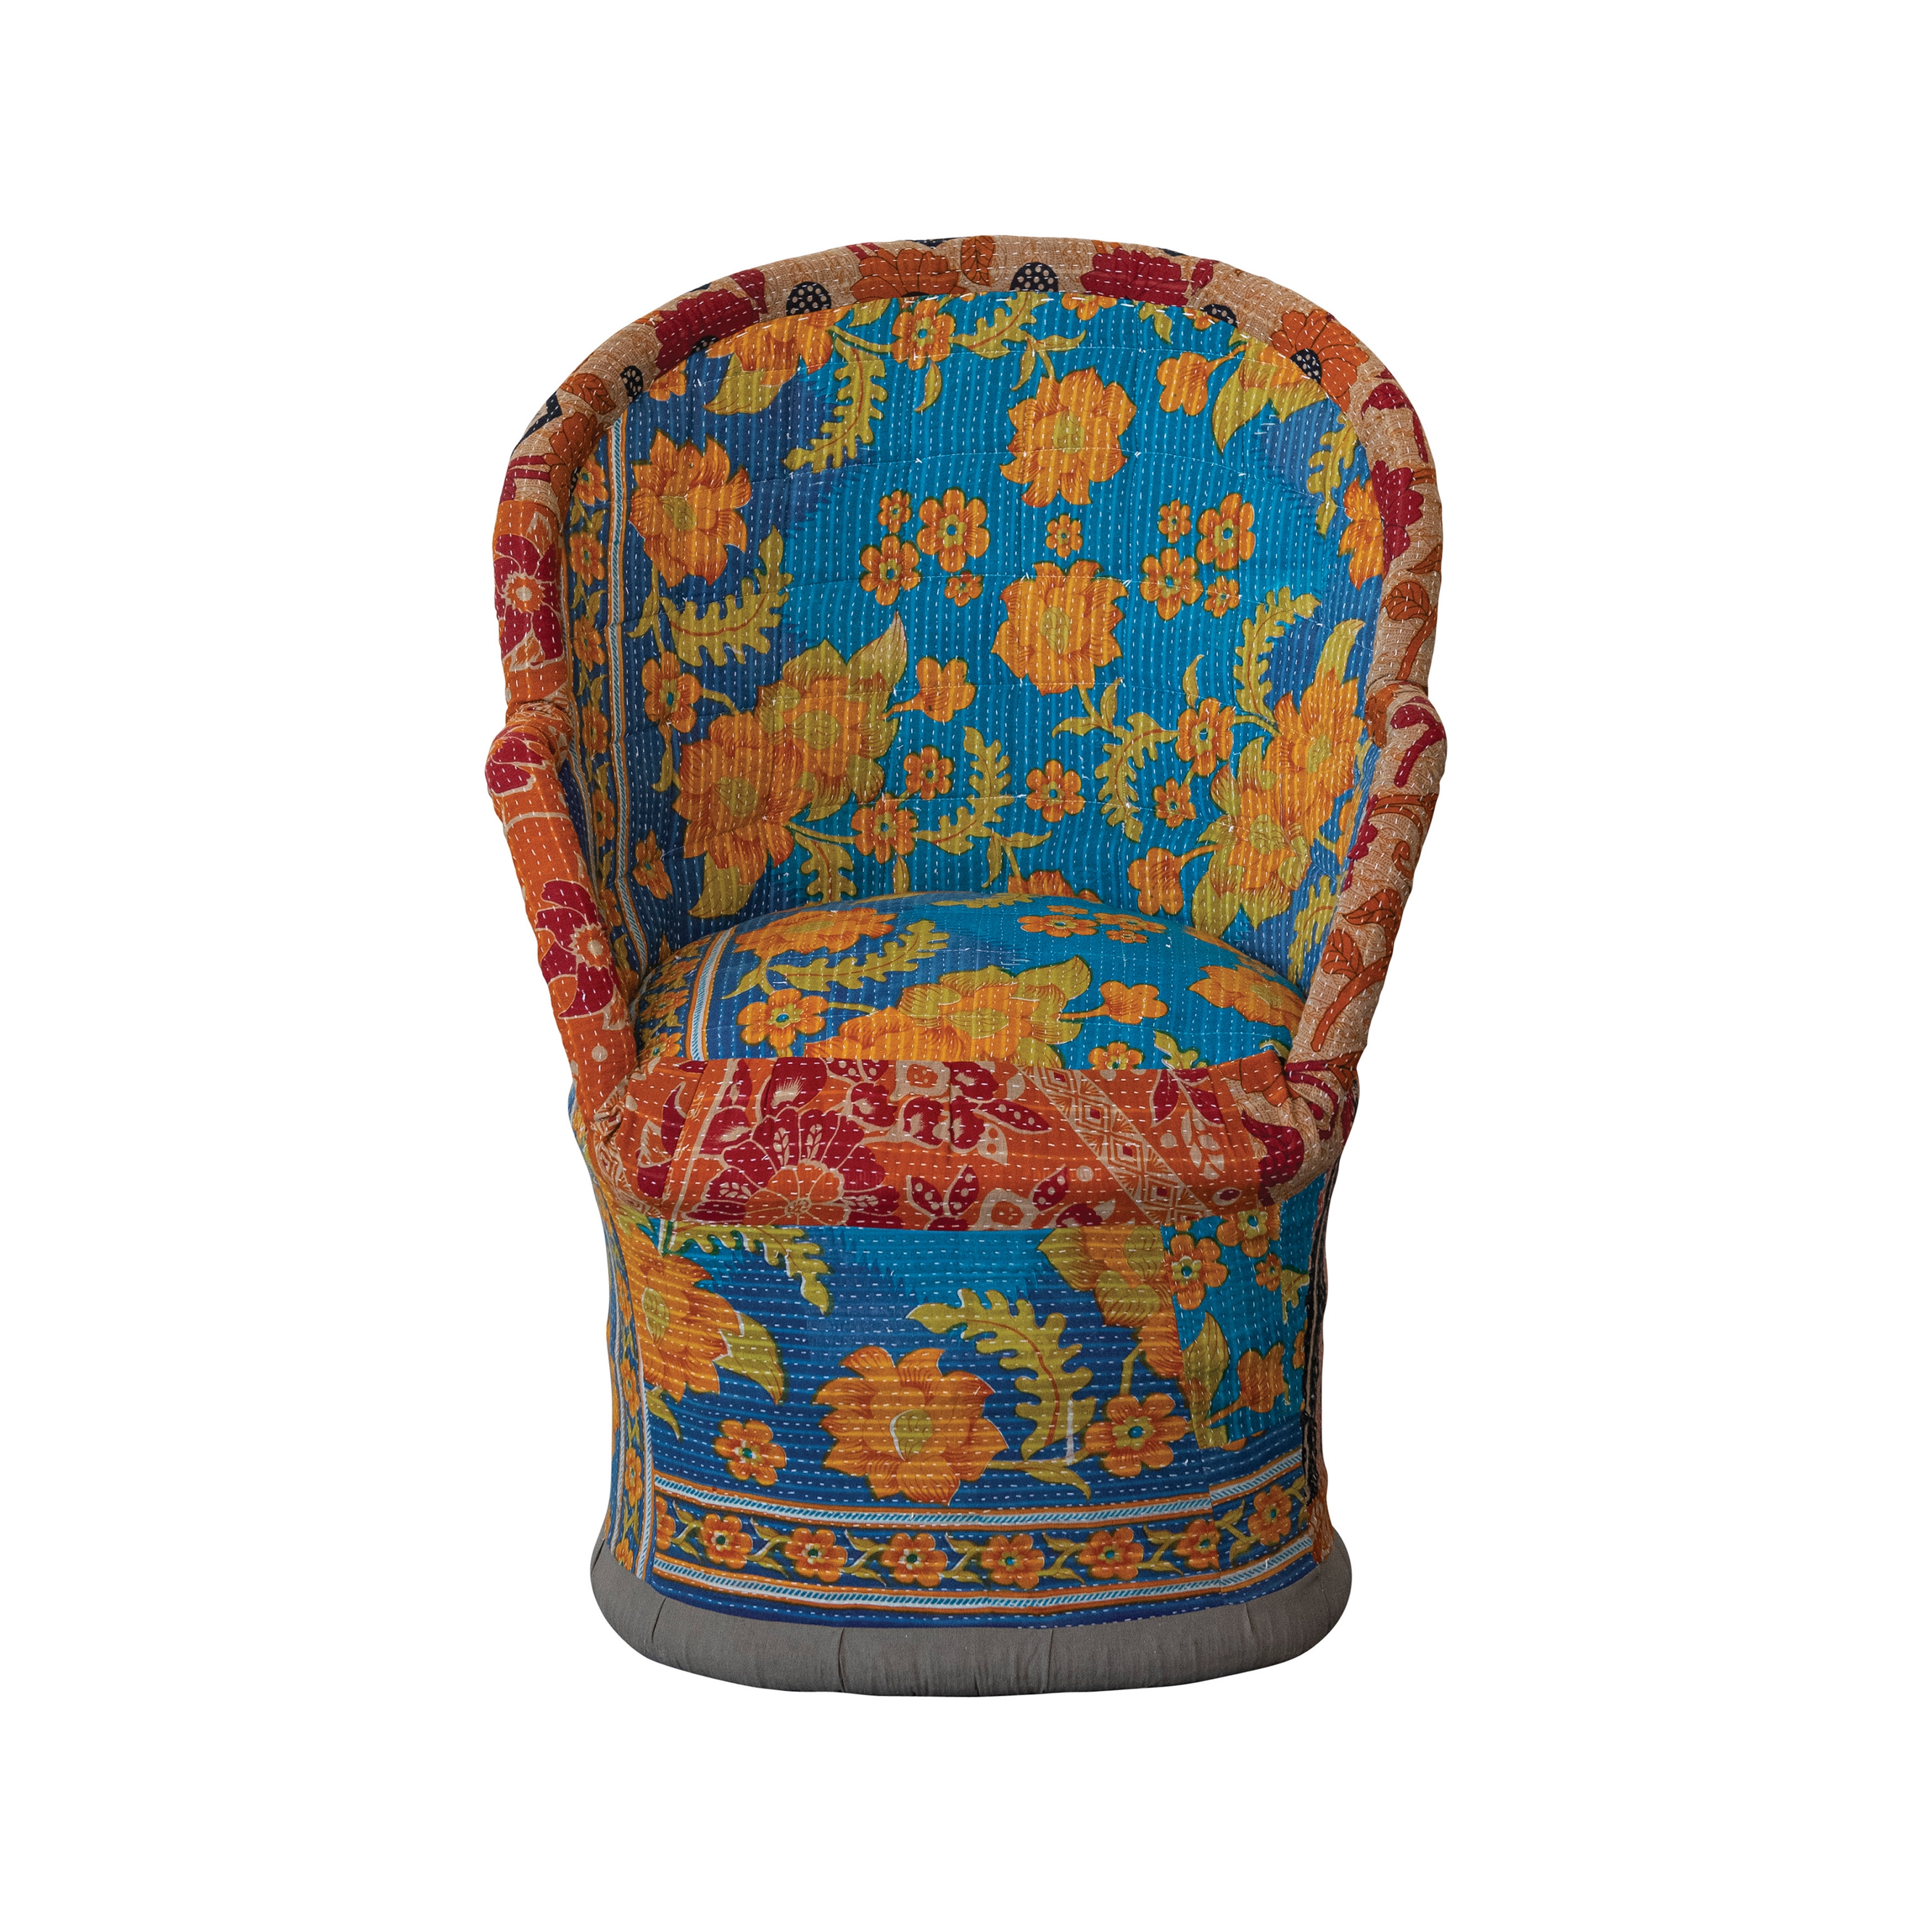 Cotton Kantha Cane Chair with Patterns, Multicolor - Image 0